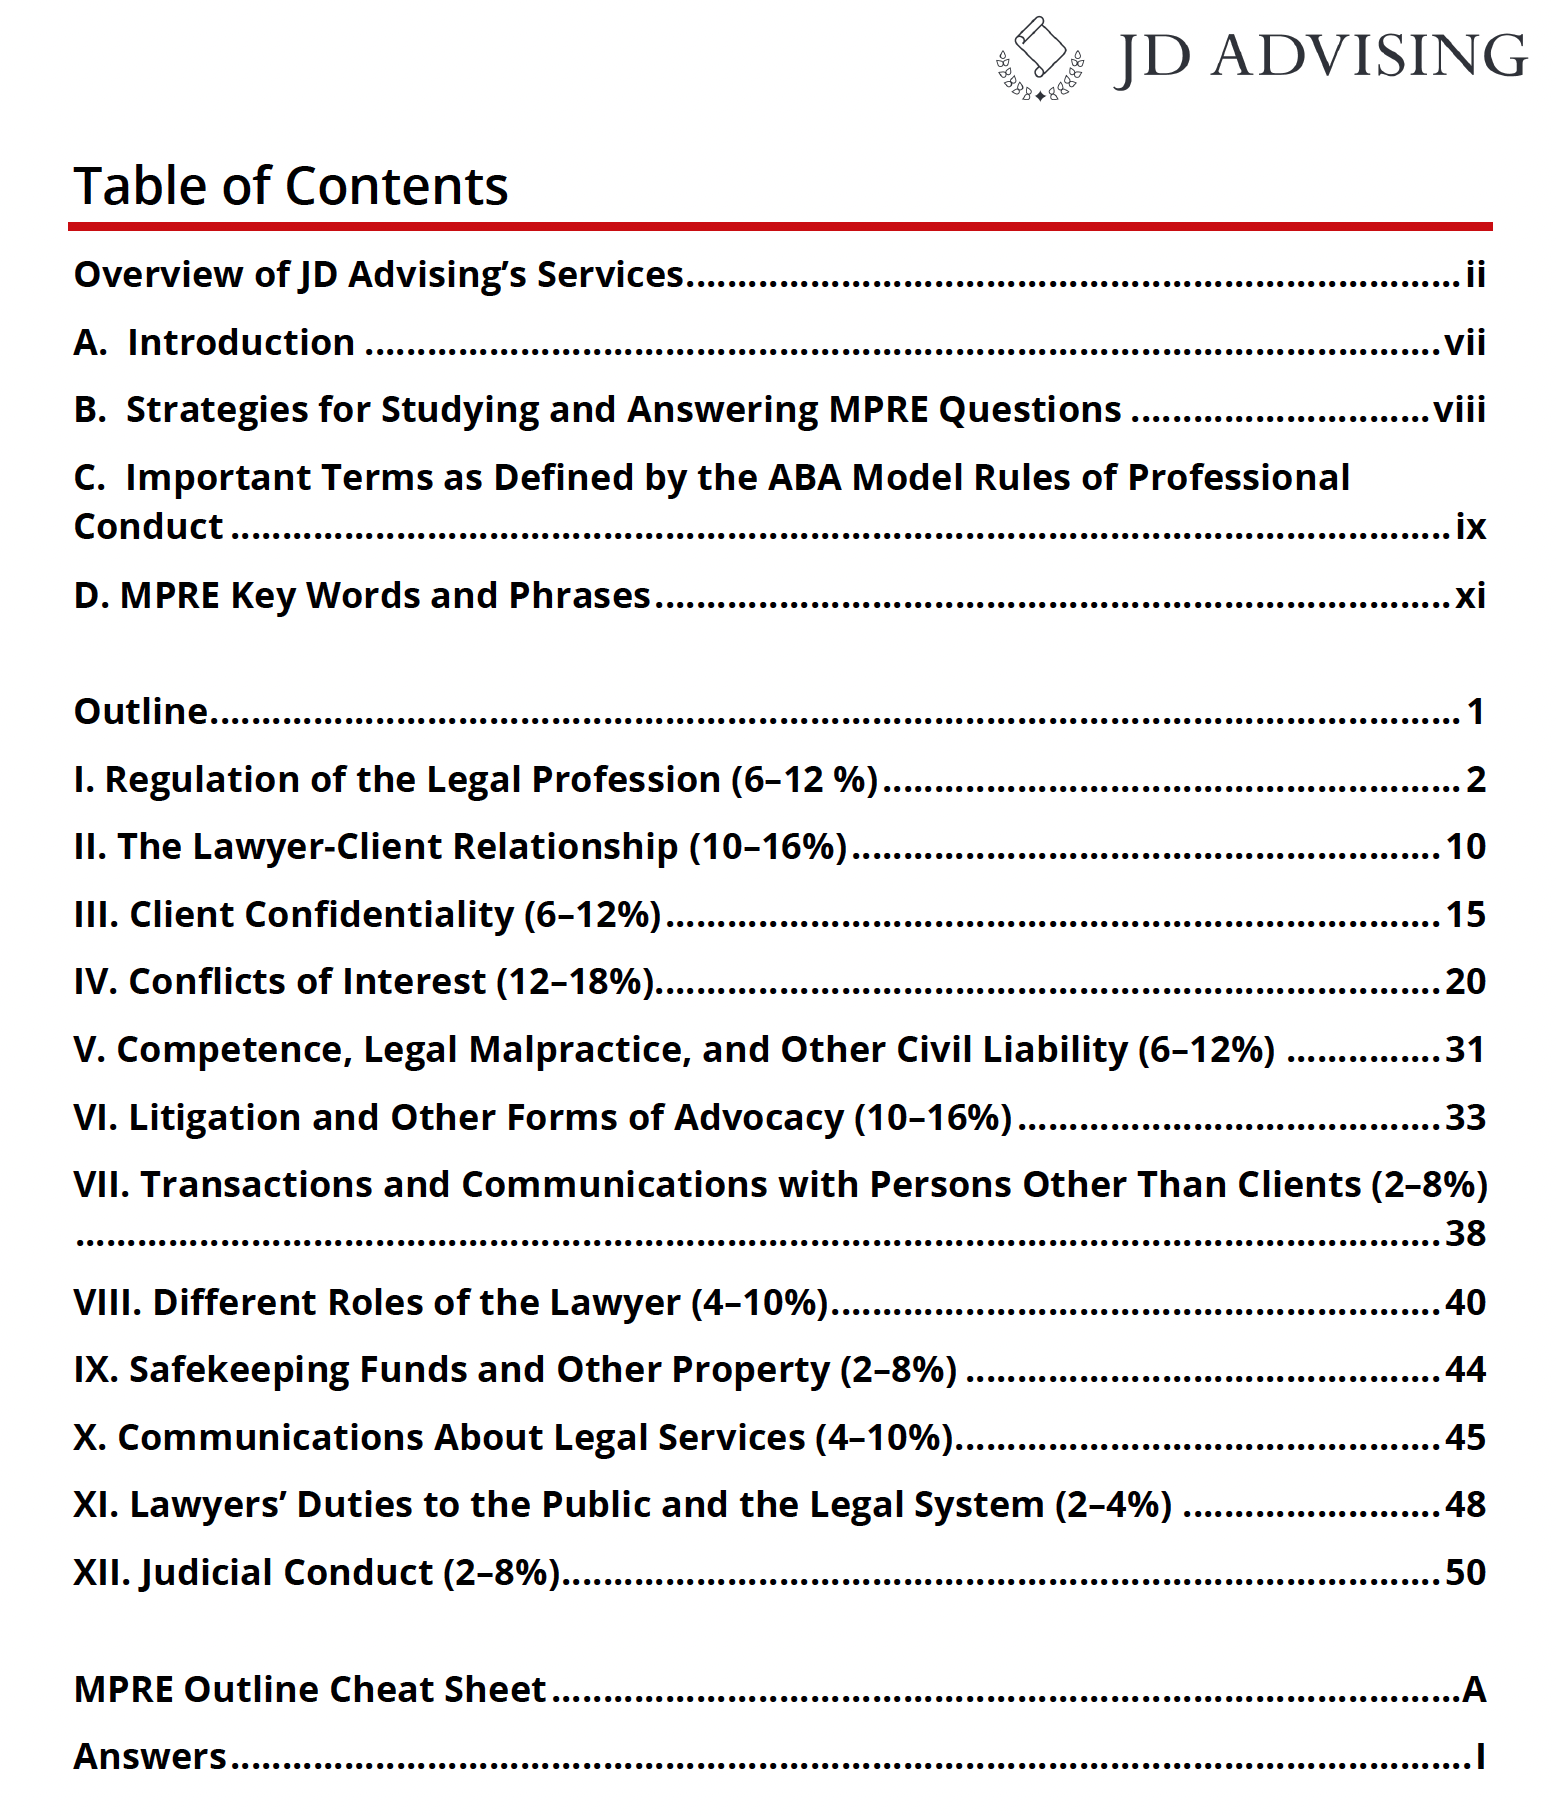 MPRE Outline Table of Contents